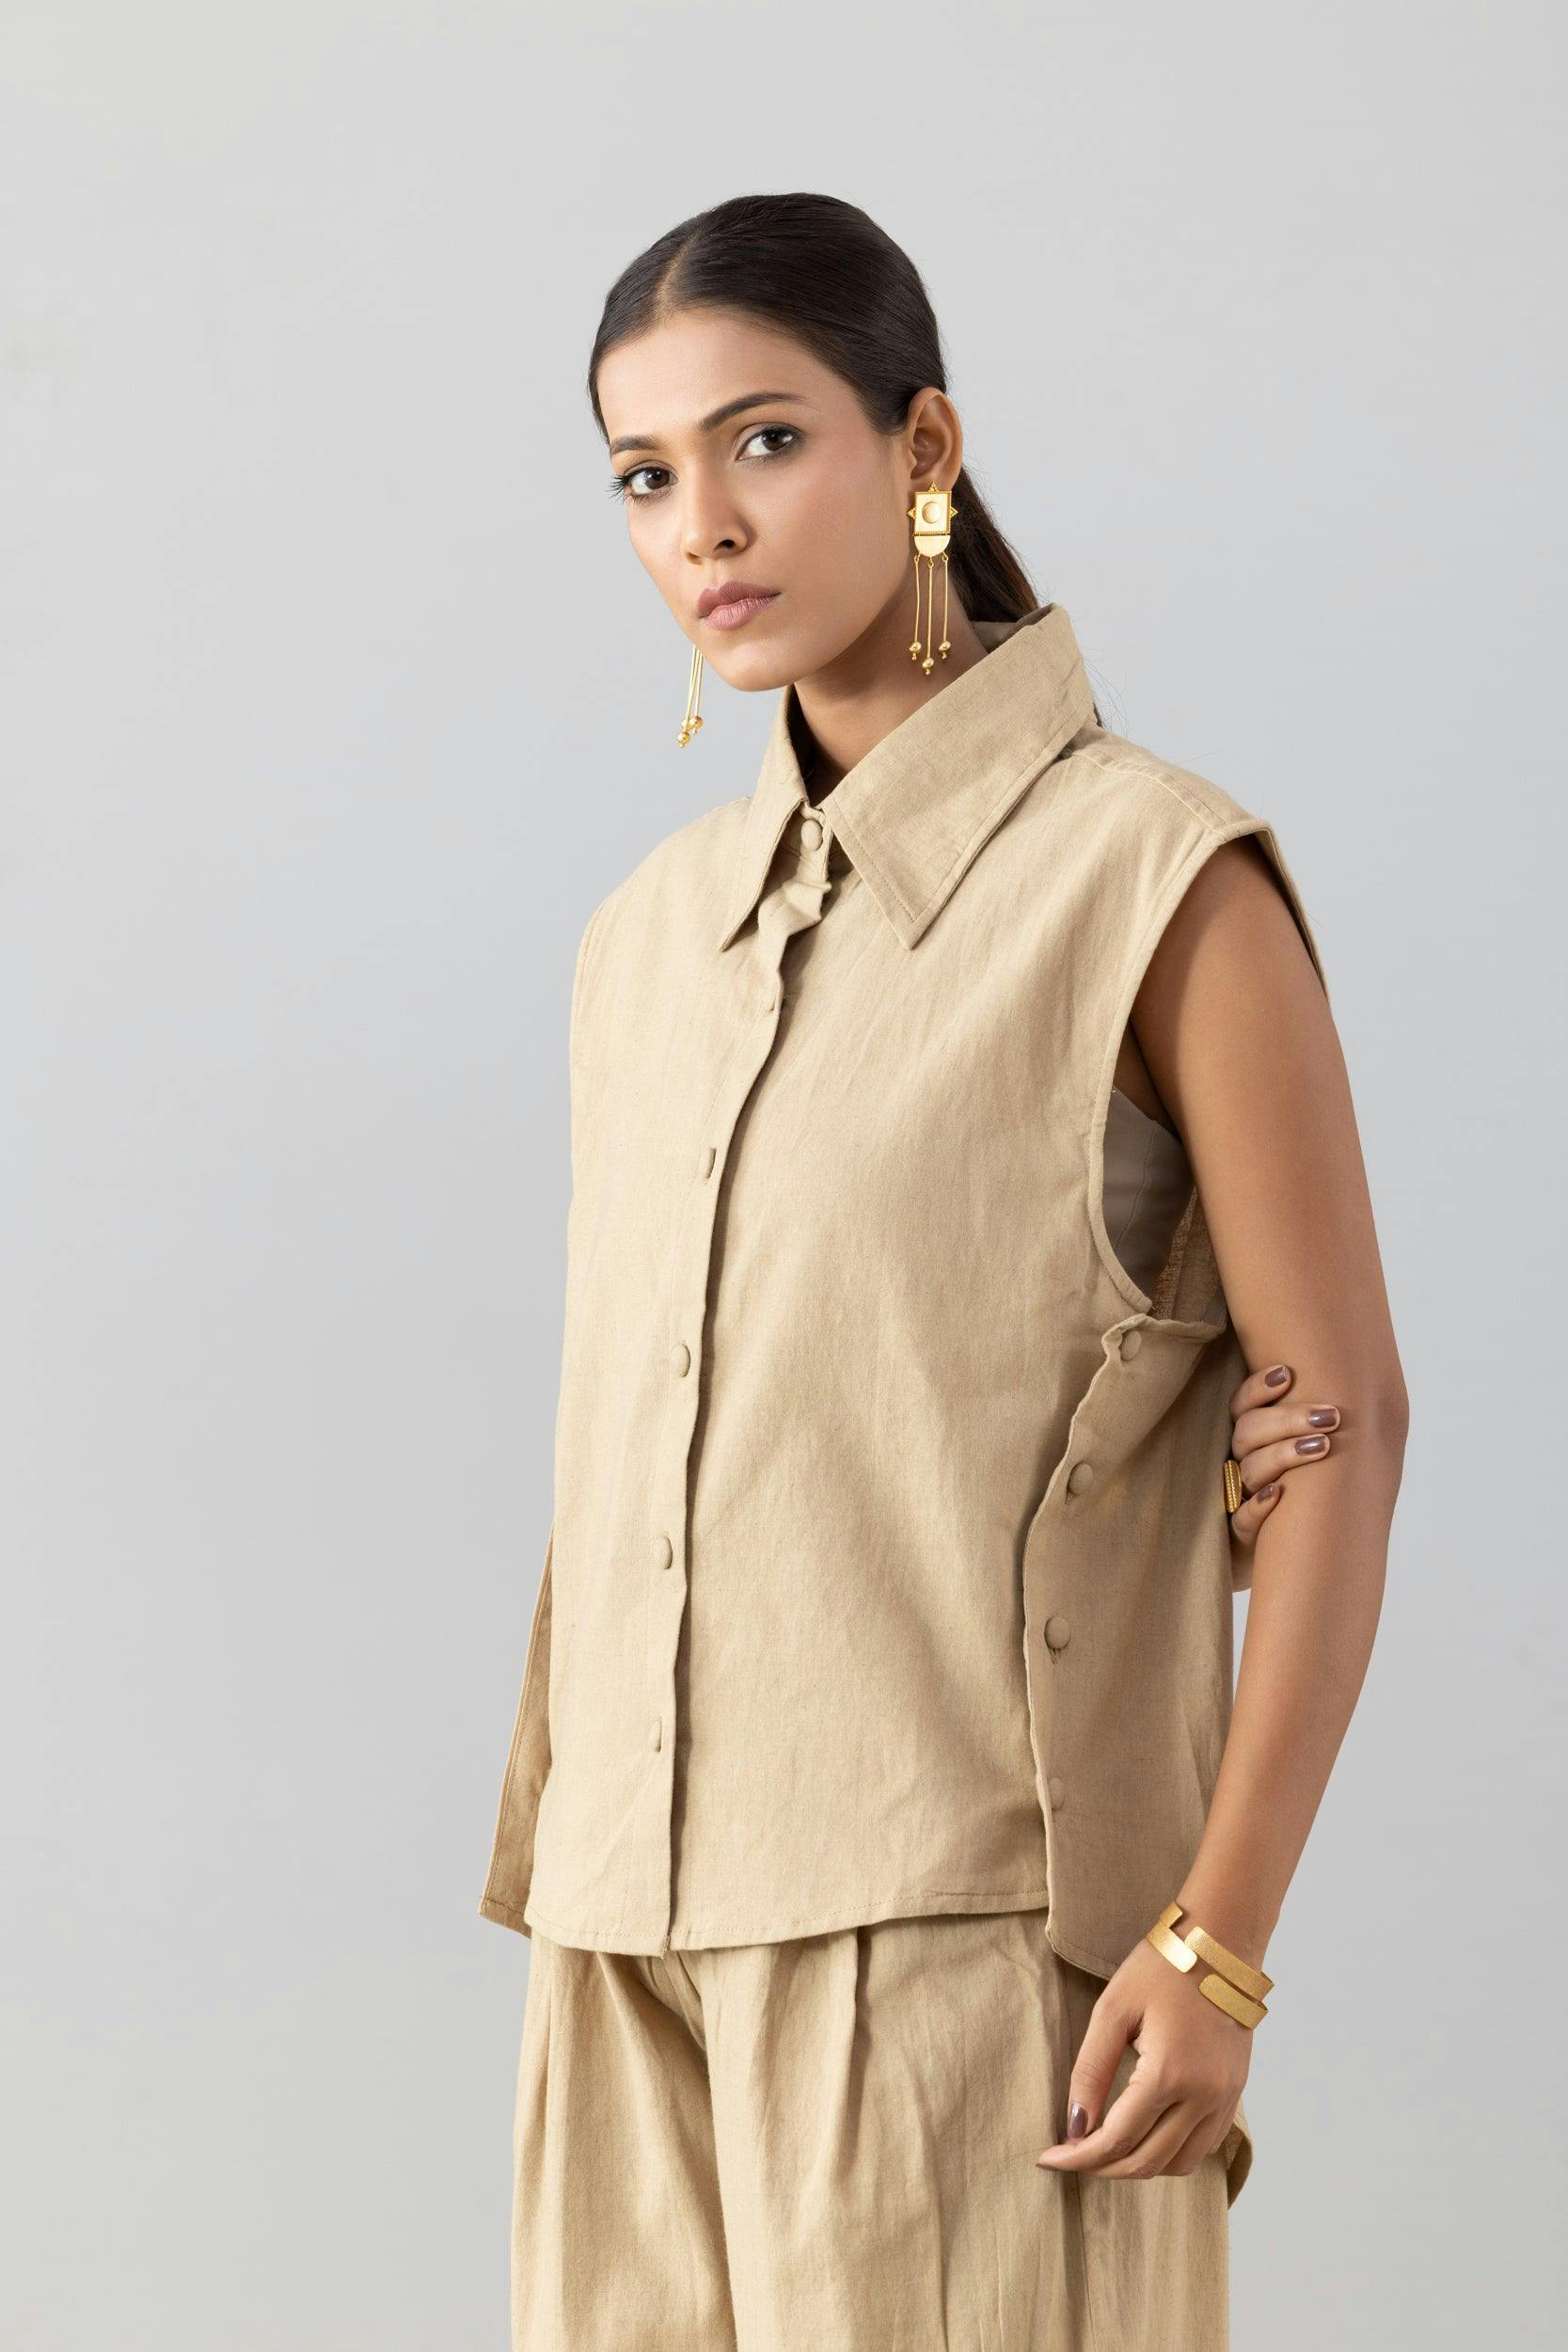 CREME OXFORD BLOUSE, a product by MARKKAH STUDIO